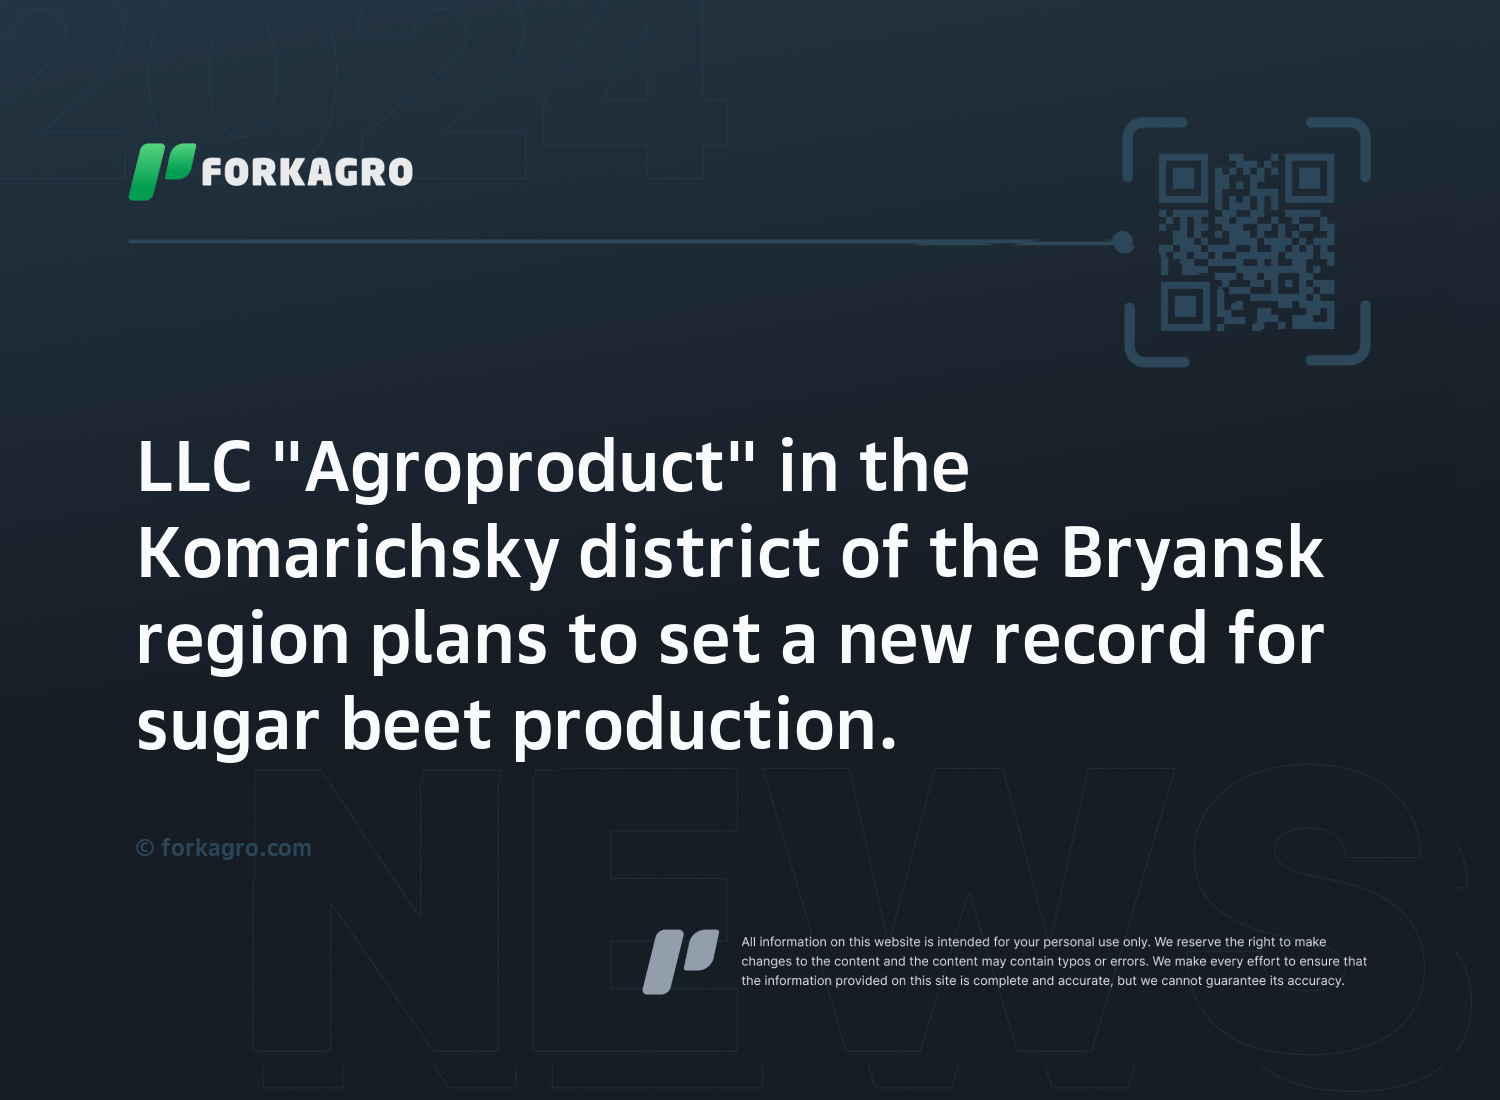 LLC "Agroproduct" in the Komarichsky district of the Bryansk region plans to set a new record for sugar beet production.